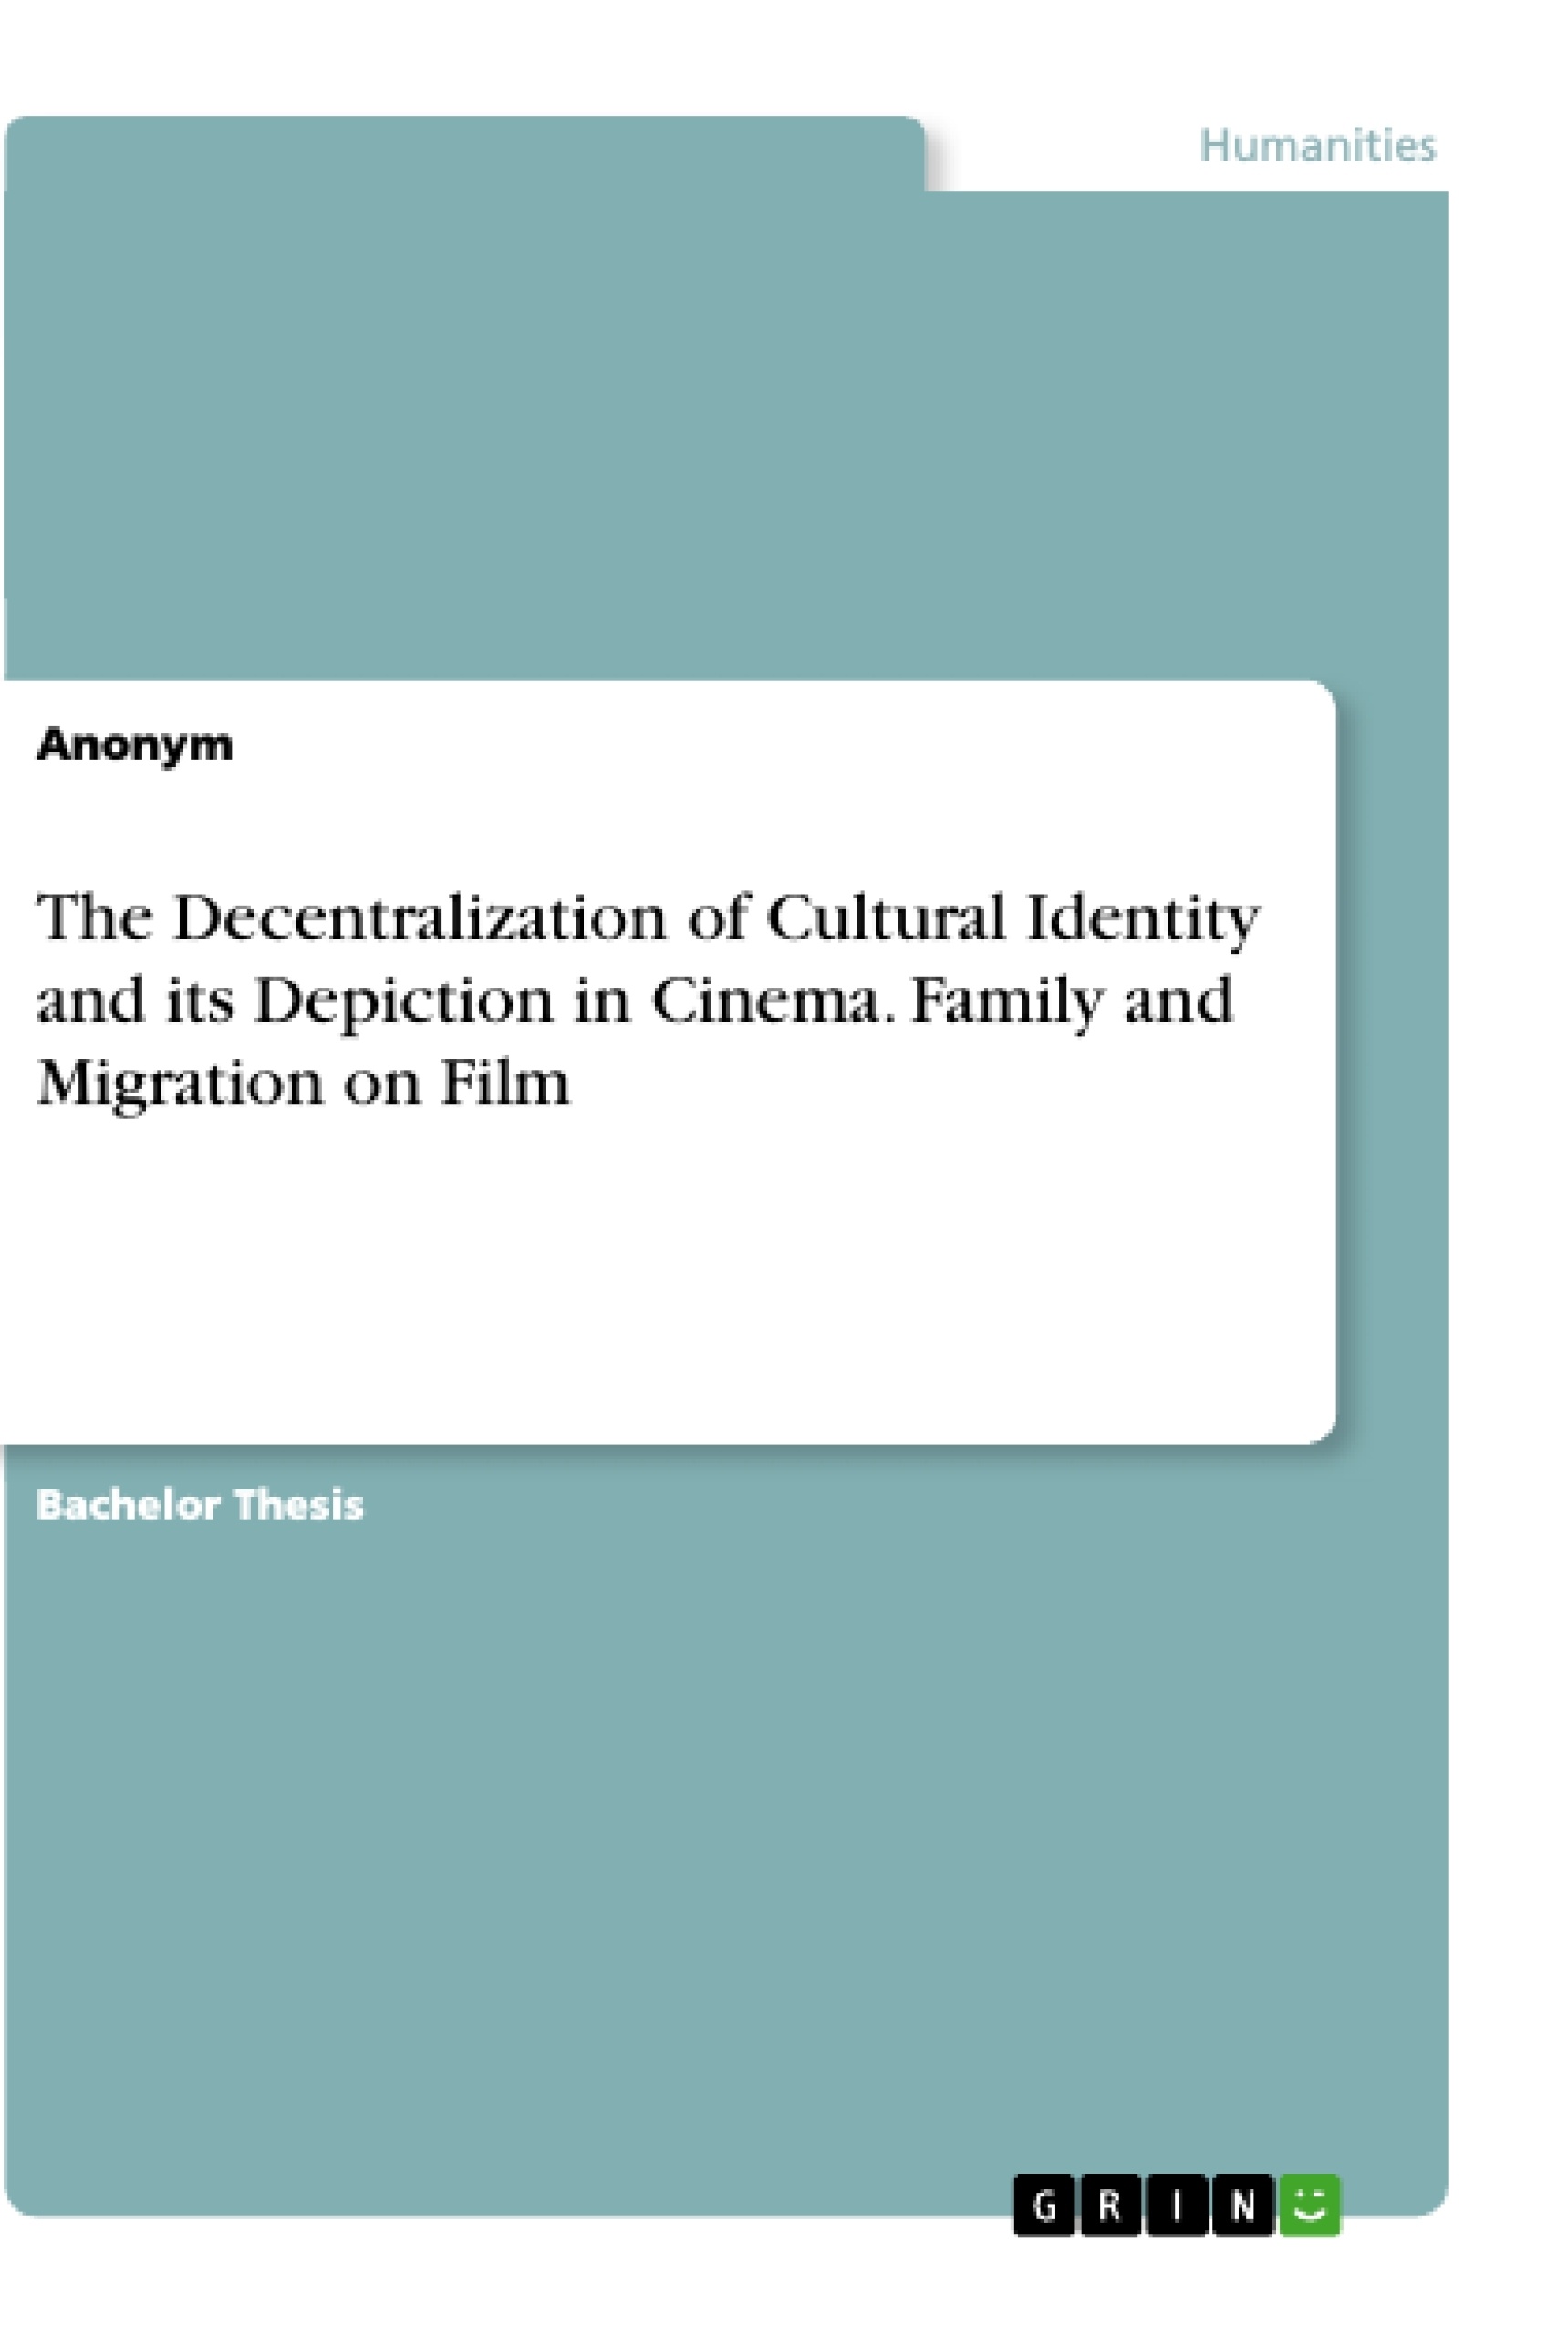 Title: The Decentralization of Cultural Identity and its Depiction in Cinema. Family and Migration on Film